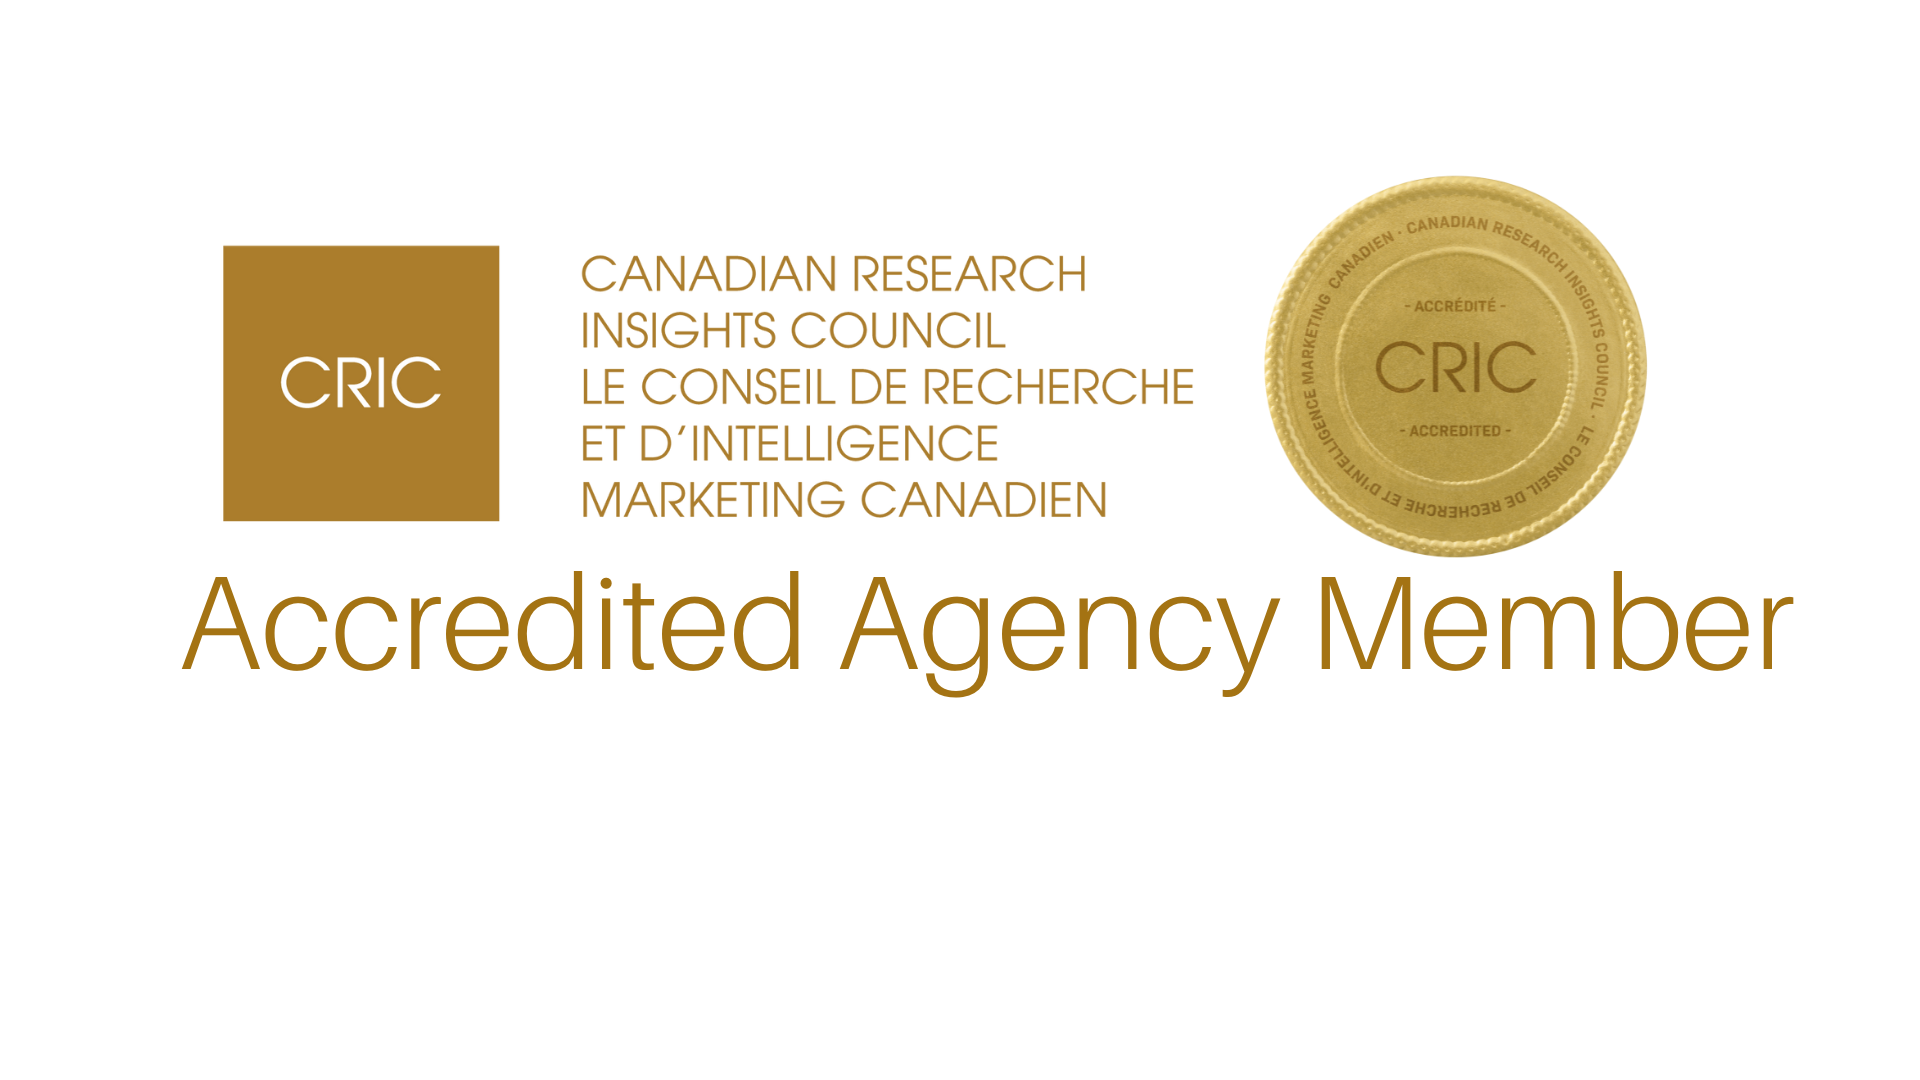 Canadian Research Insights Council